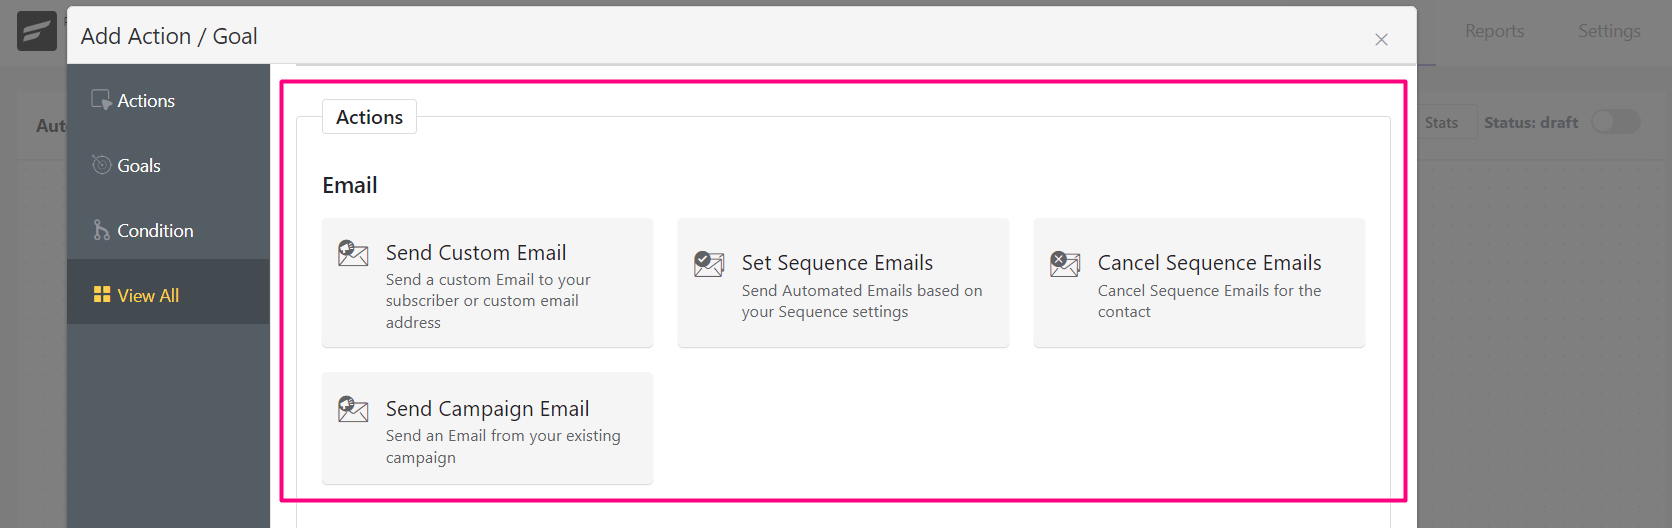 crm actions email